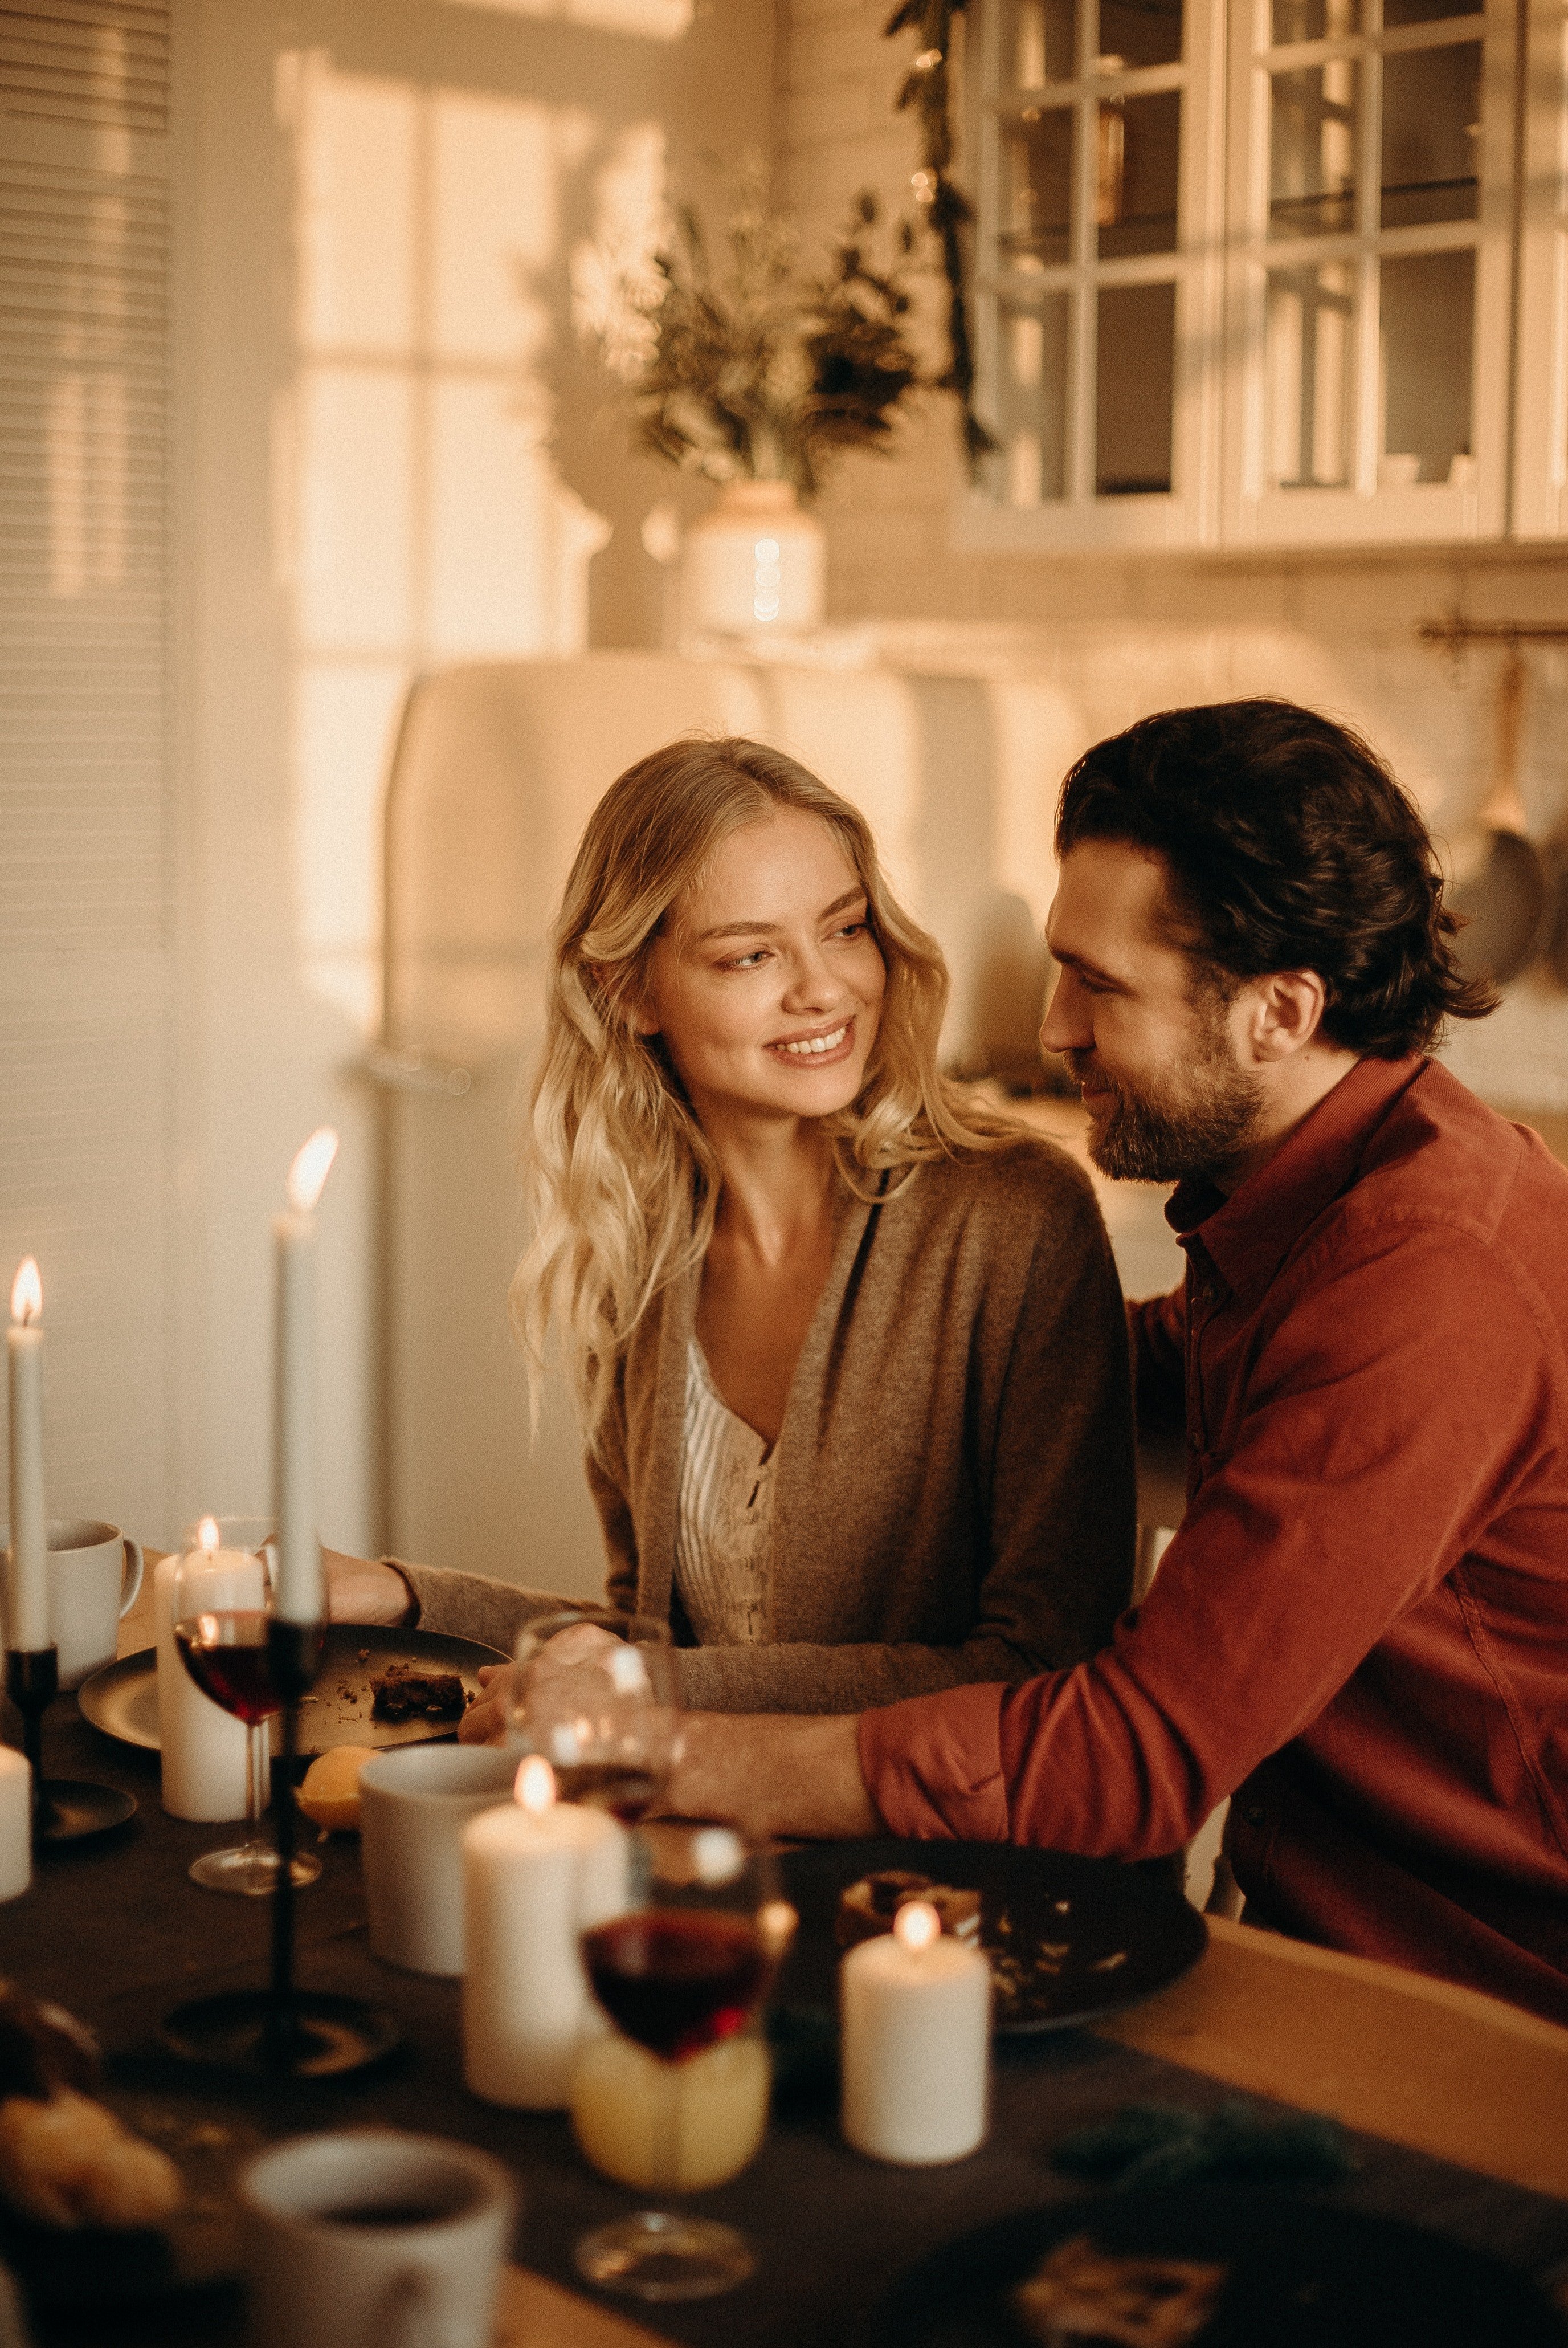 The couple celebrated their anniversary with a romantic dinner. | Photo: Pexels/cottonbro